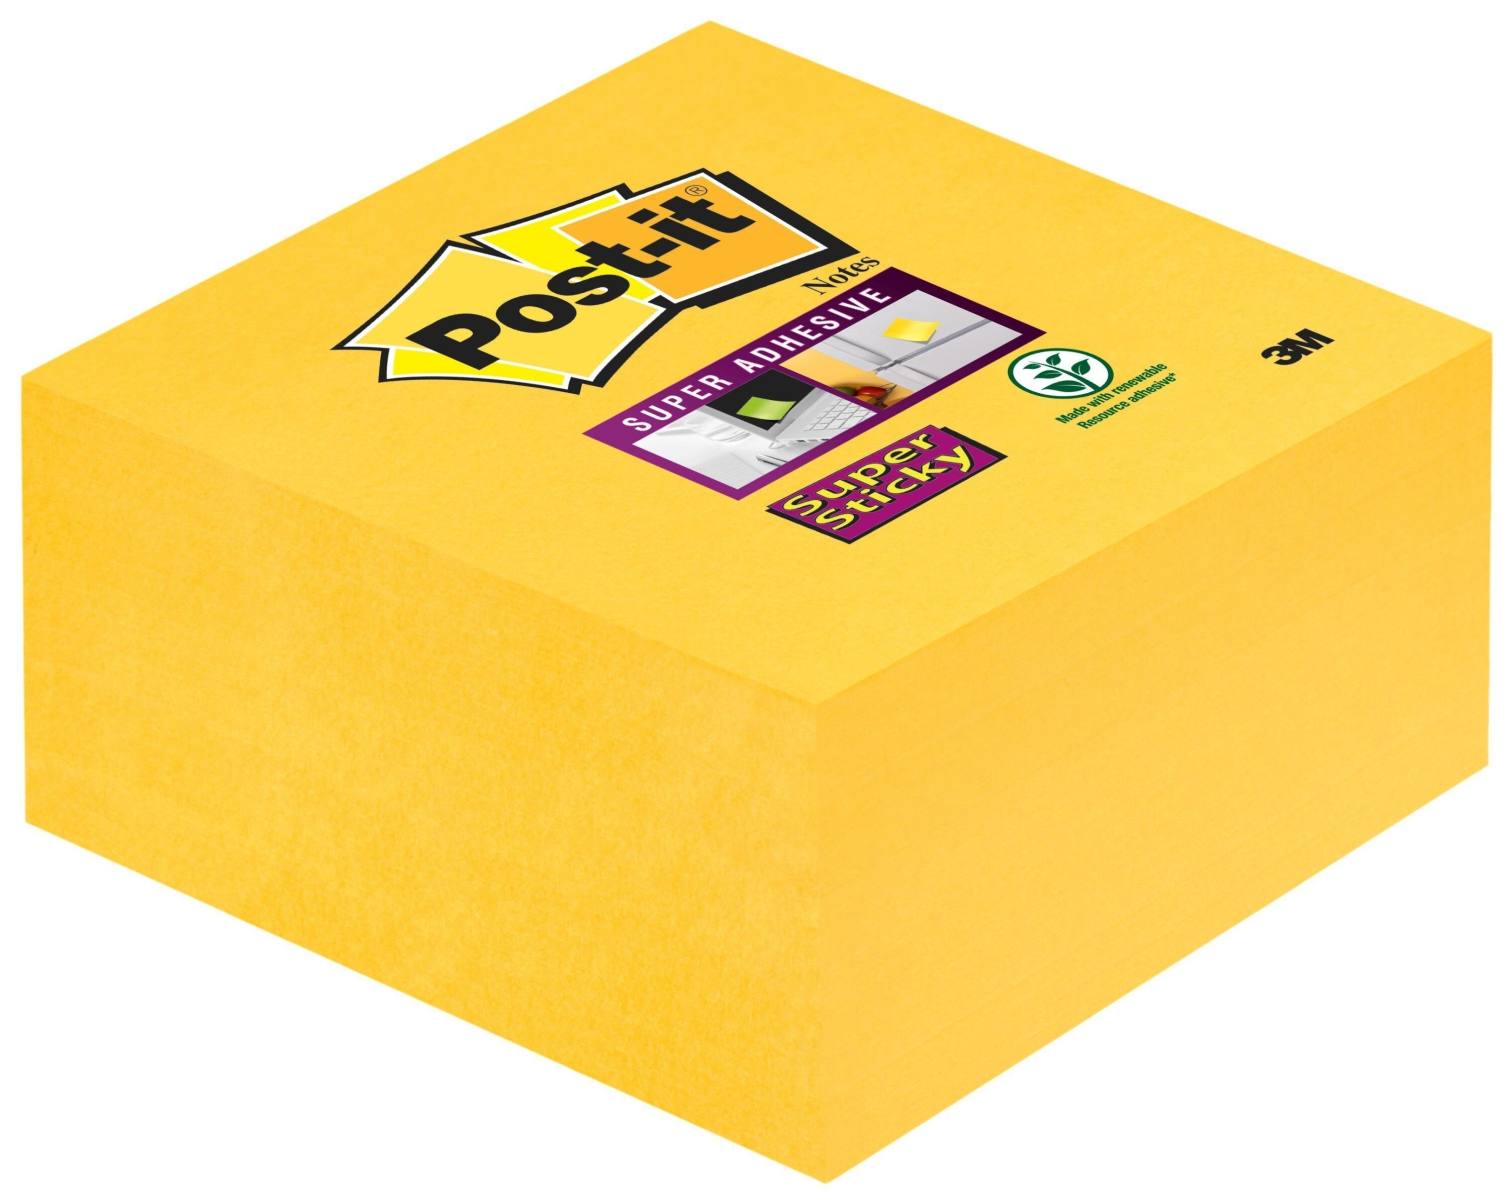 3M Post-it Super Sticky Cube 2028-S, 76 mm x 76 mm, daffodil yellow, 1 cube of 350 sheets